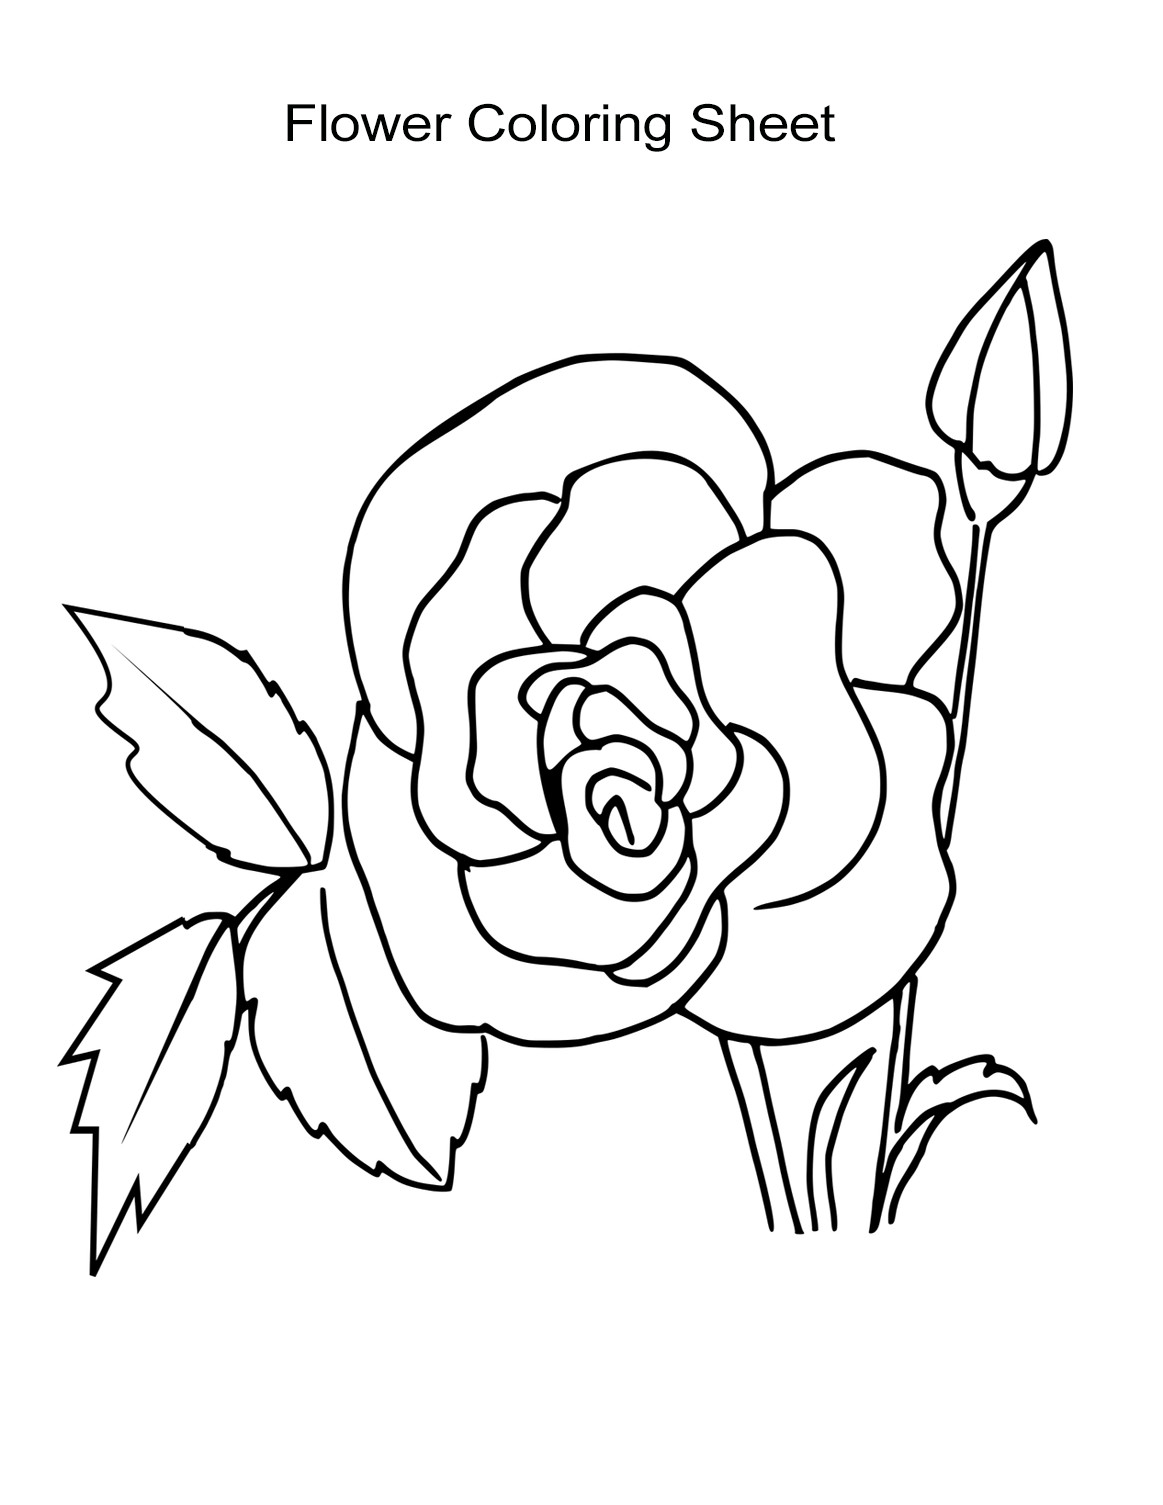 Flower Coloring Pages For Girls
 10 Flower Coloring Sheets for Girls and Boys ALL ESL